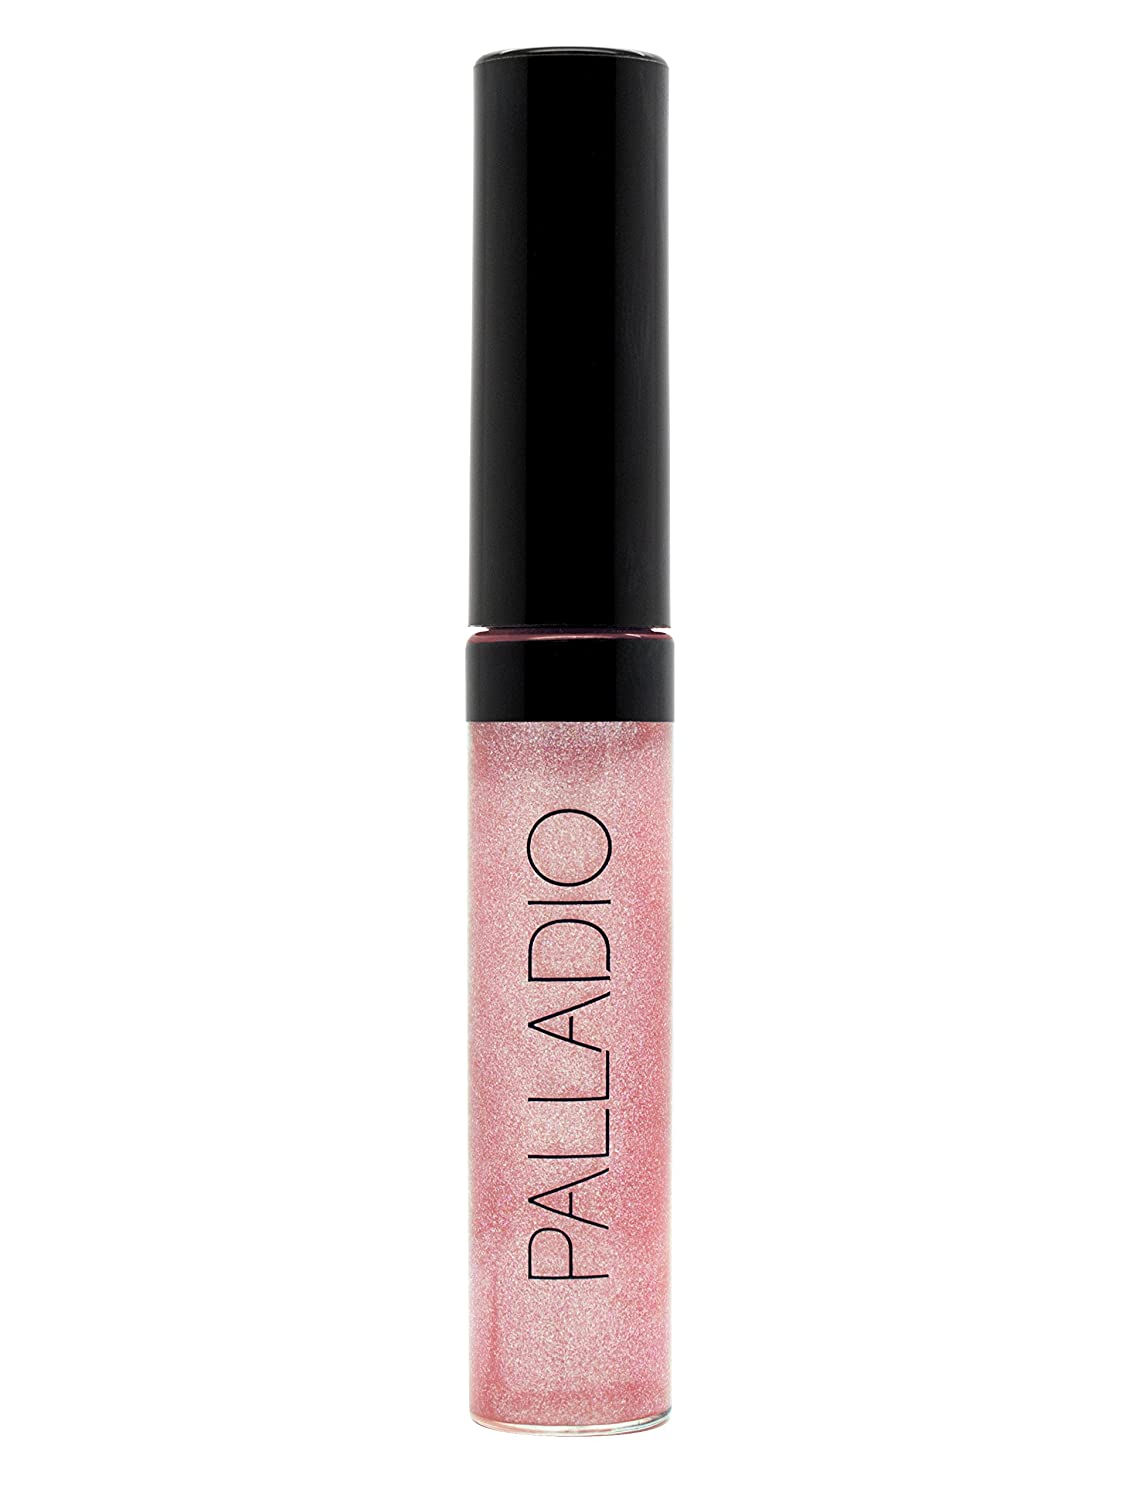 Palladio Lip Gloss, Pink Candy, Non-Sticky Lip Gloss, Contains Vitamin E and Aloe, Offers Intense Color and Moisturization, Minimizes Lip Wrinkles, Softens Lips with Beautiful Shiny Finish. Cruelty Free.